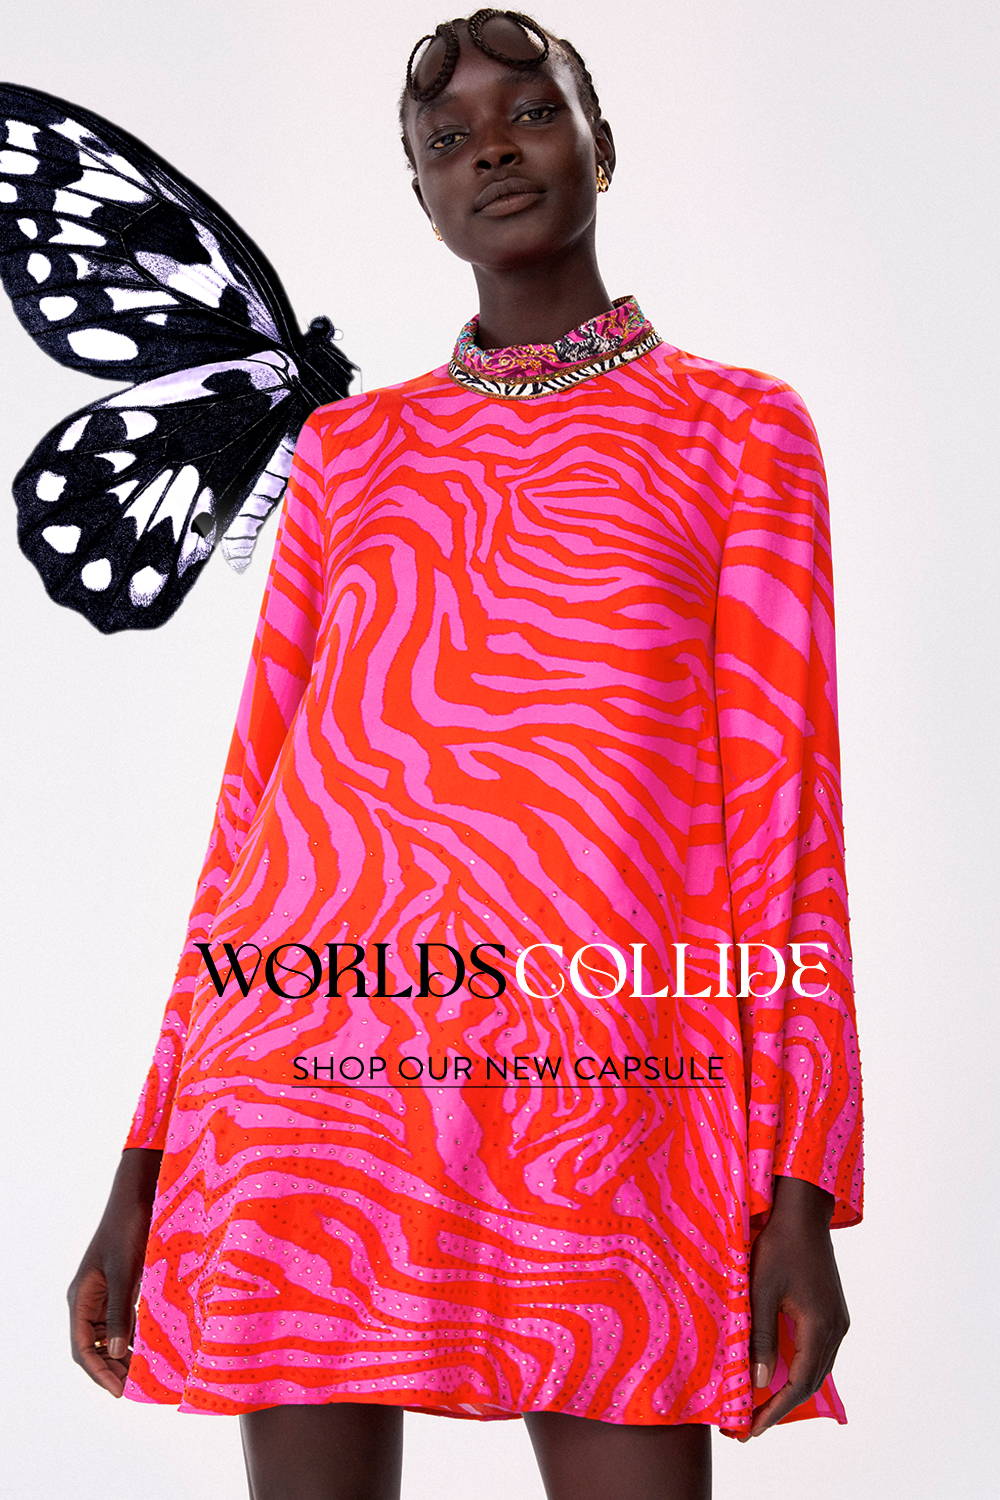 CAMILLA | Worlds Collide | SHOP OUR NEW CAPSULE